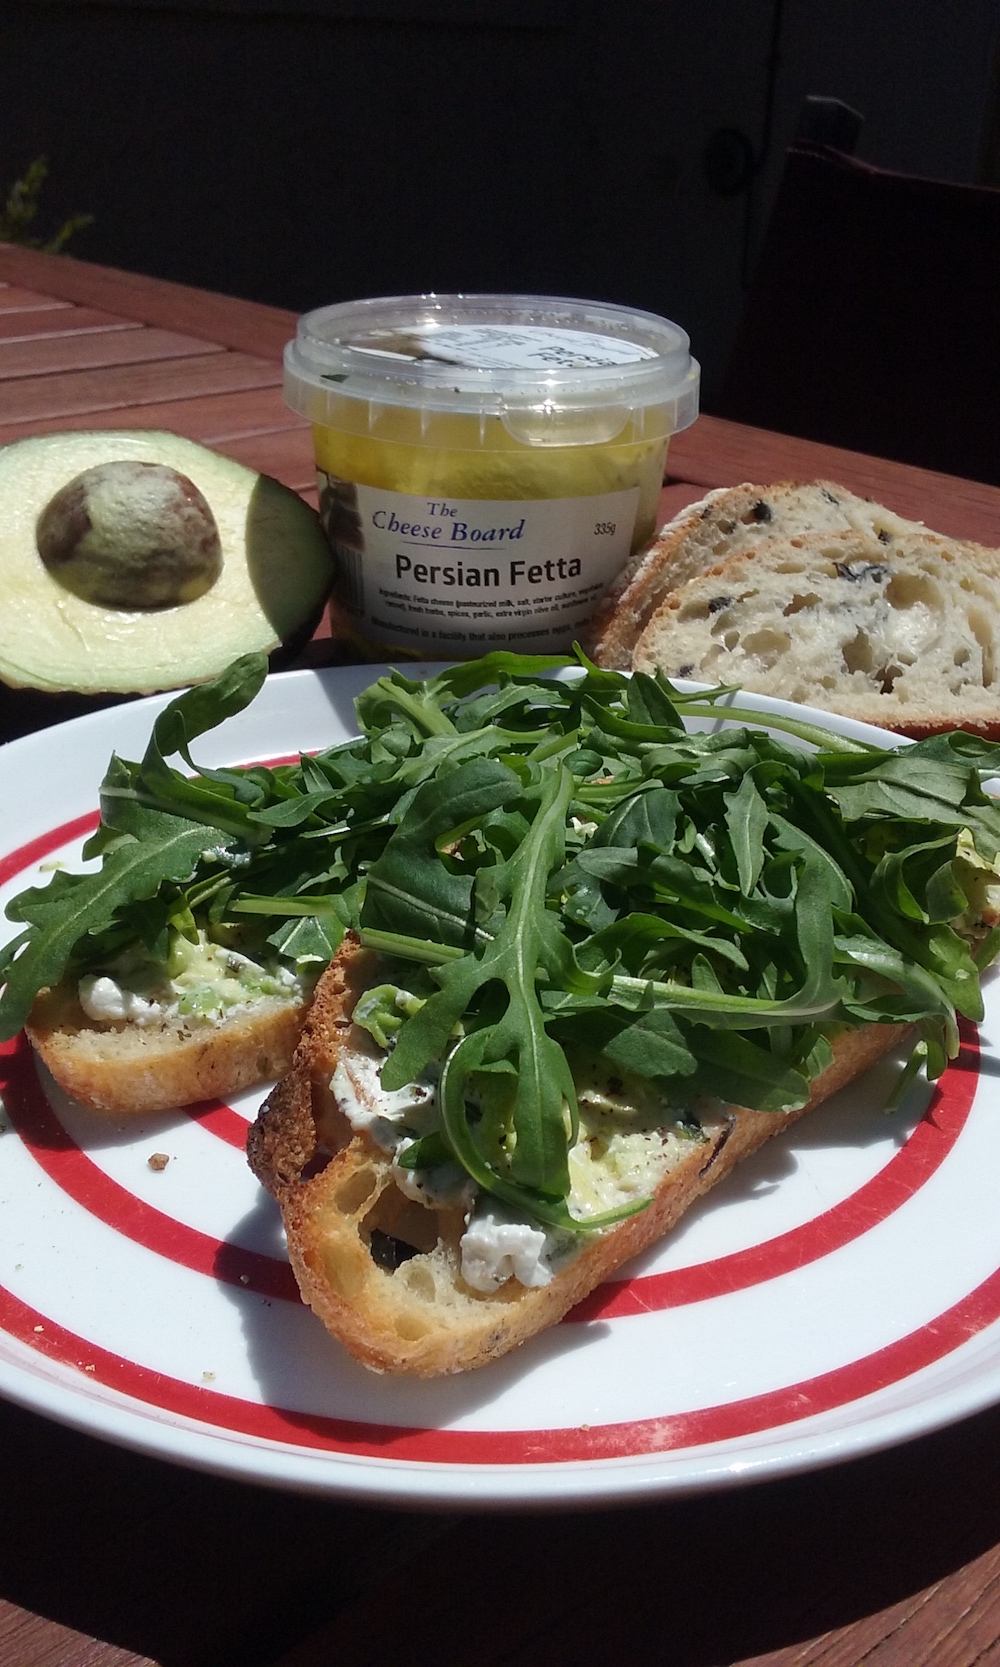 DIY avo toast with ingredients from the Fyshwick Markets. Photo: Zoe Pleasants